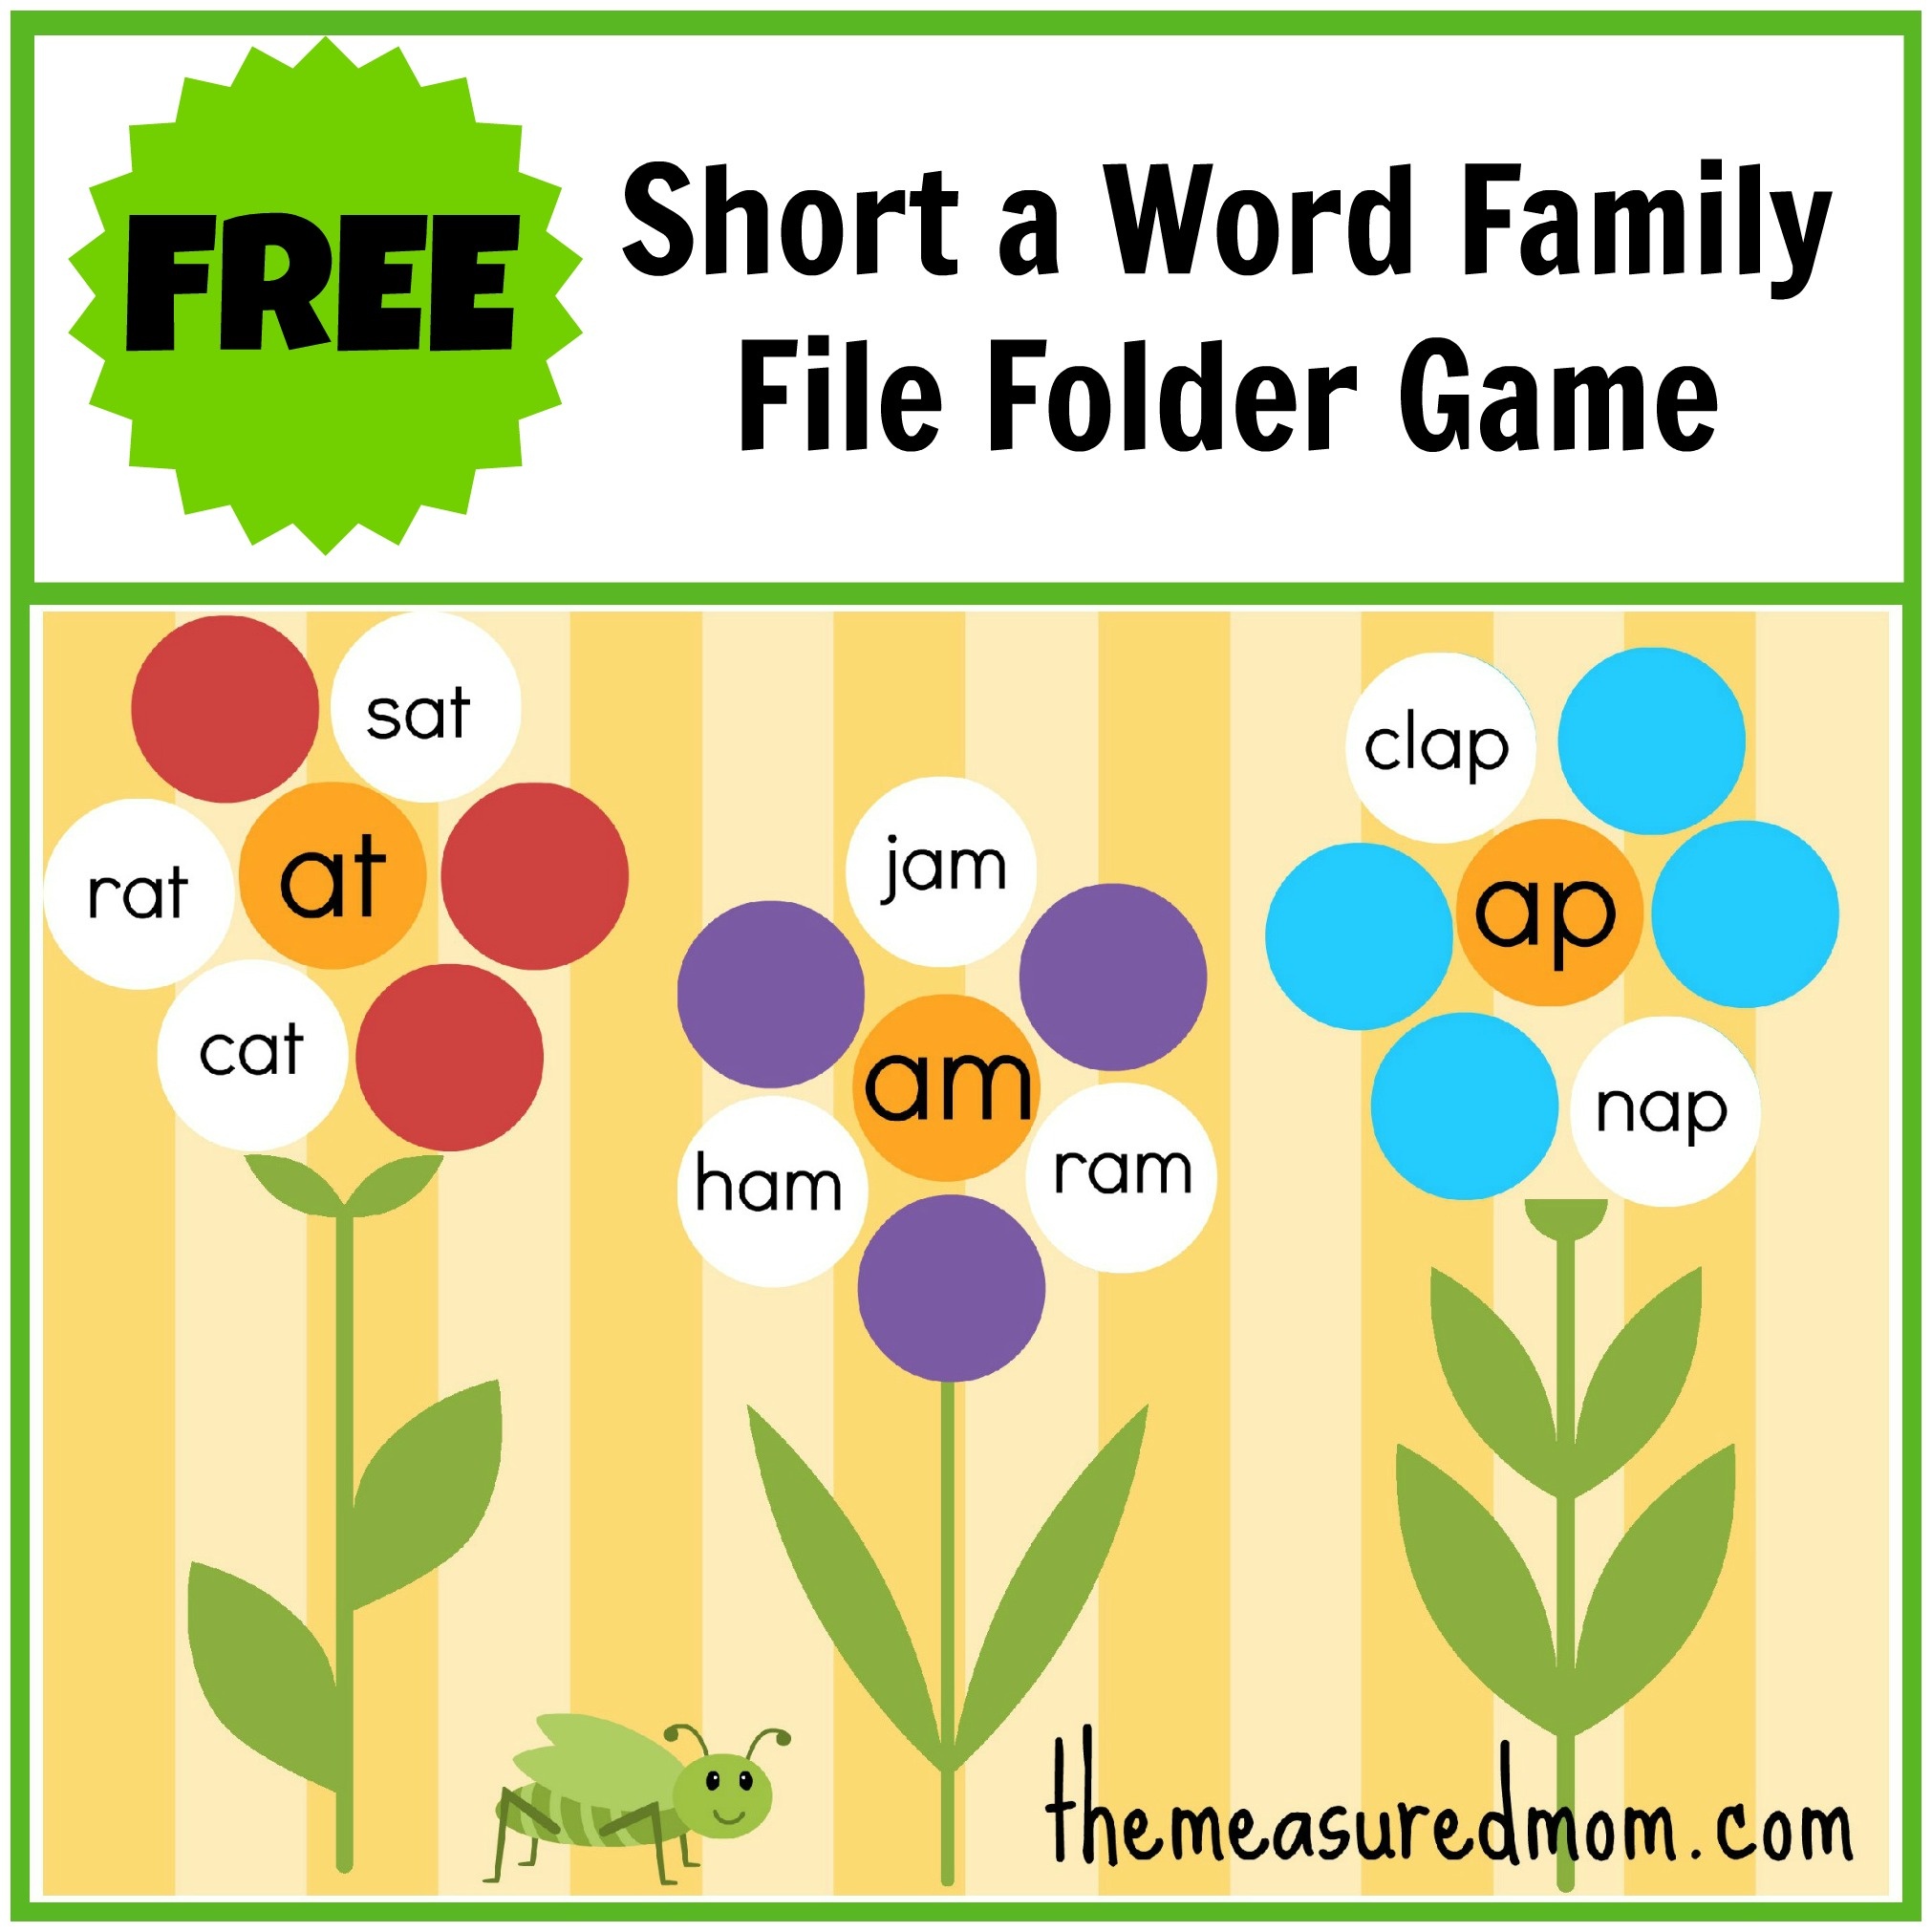 Free Word Family File Folder Game: Short A - The Measured Mom - Free Printable Fall File Folder Games